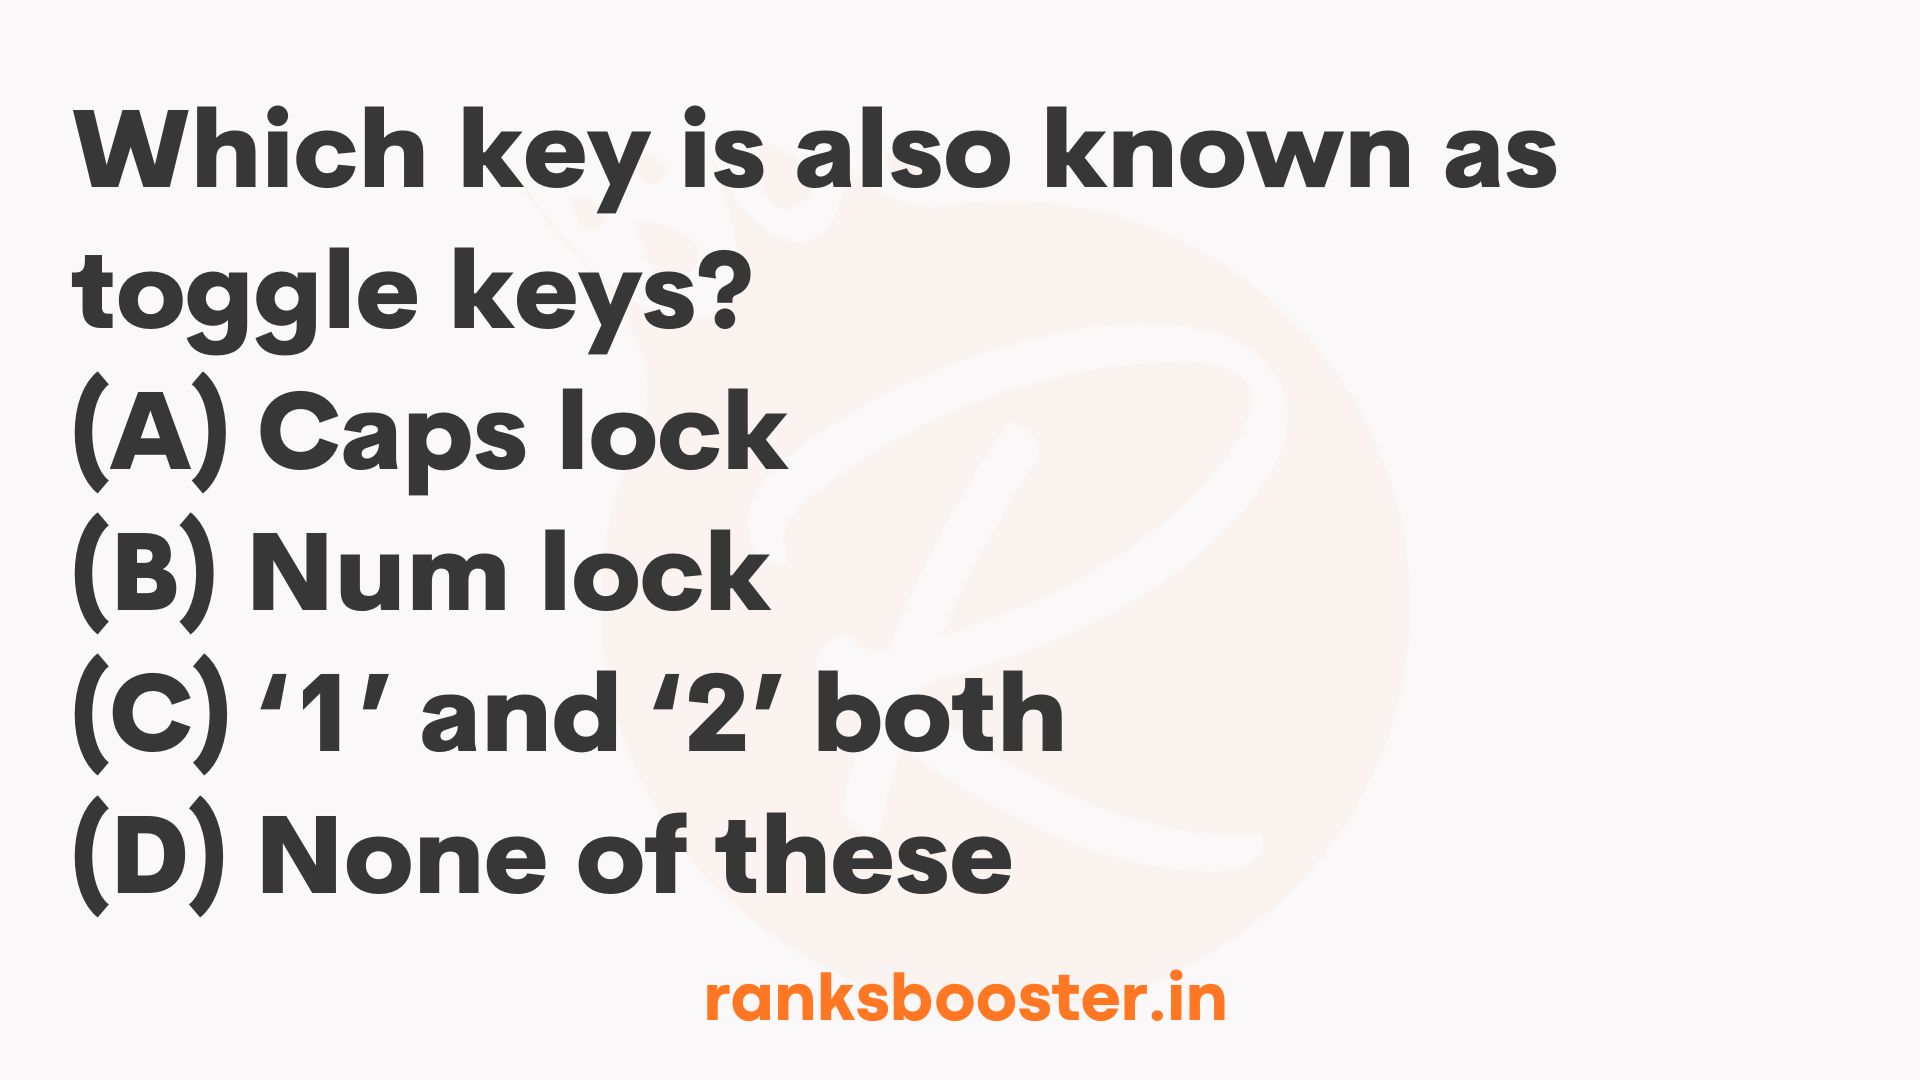 Which key is also known as toggle keys? (A) Caps lock (B) Num lock (C) ‘1’ and ‘2’ both (D) None of these